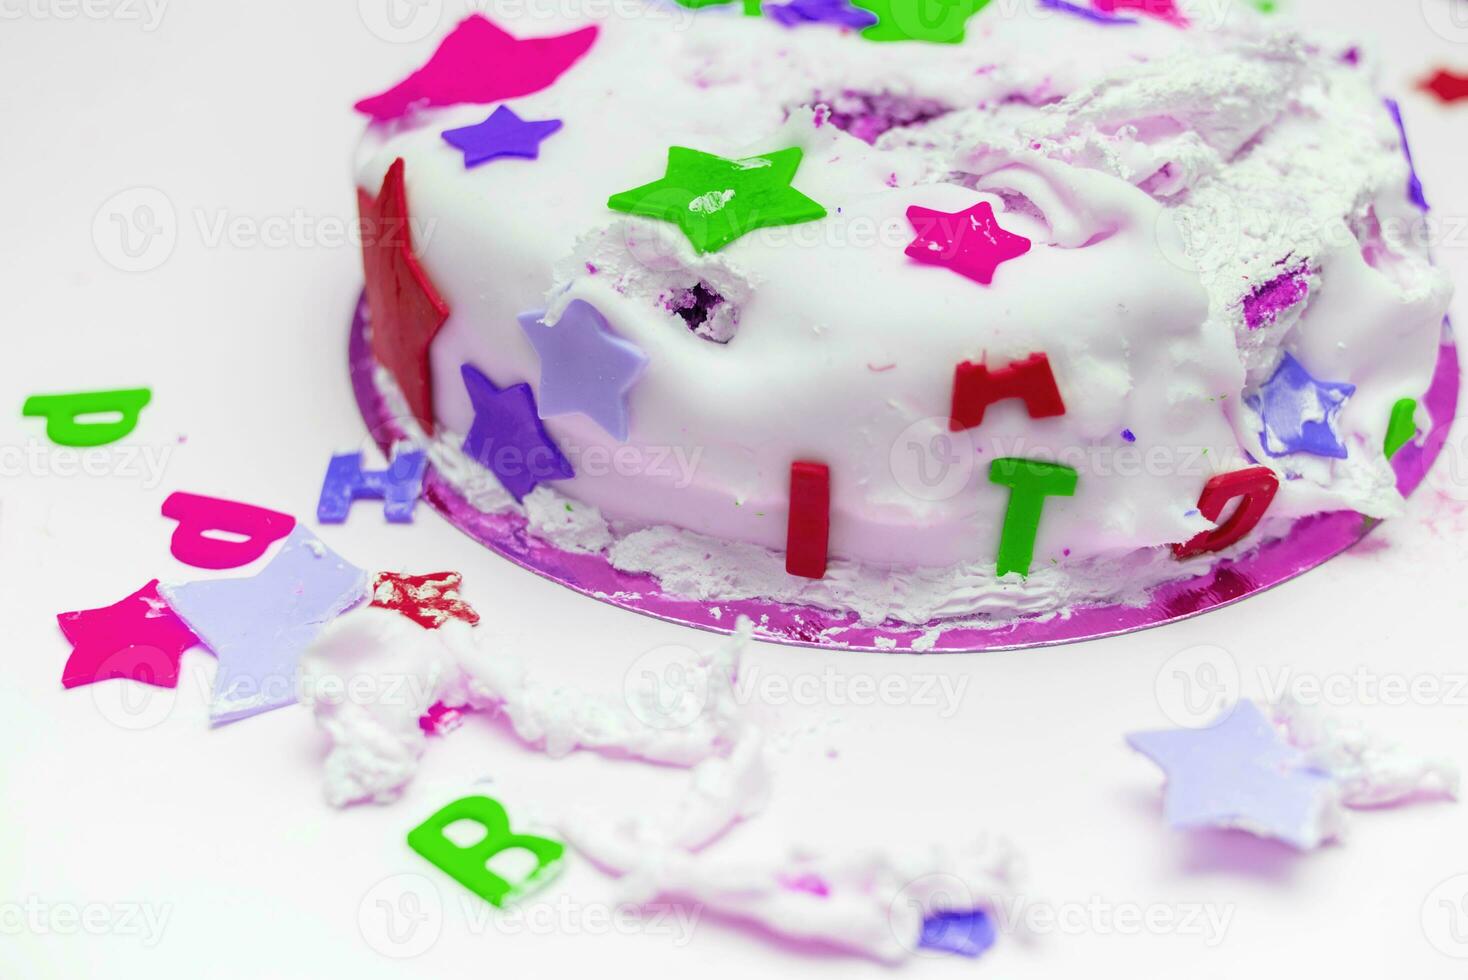 a birthday cake for a little child who broke it photo